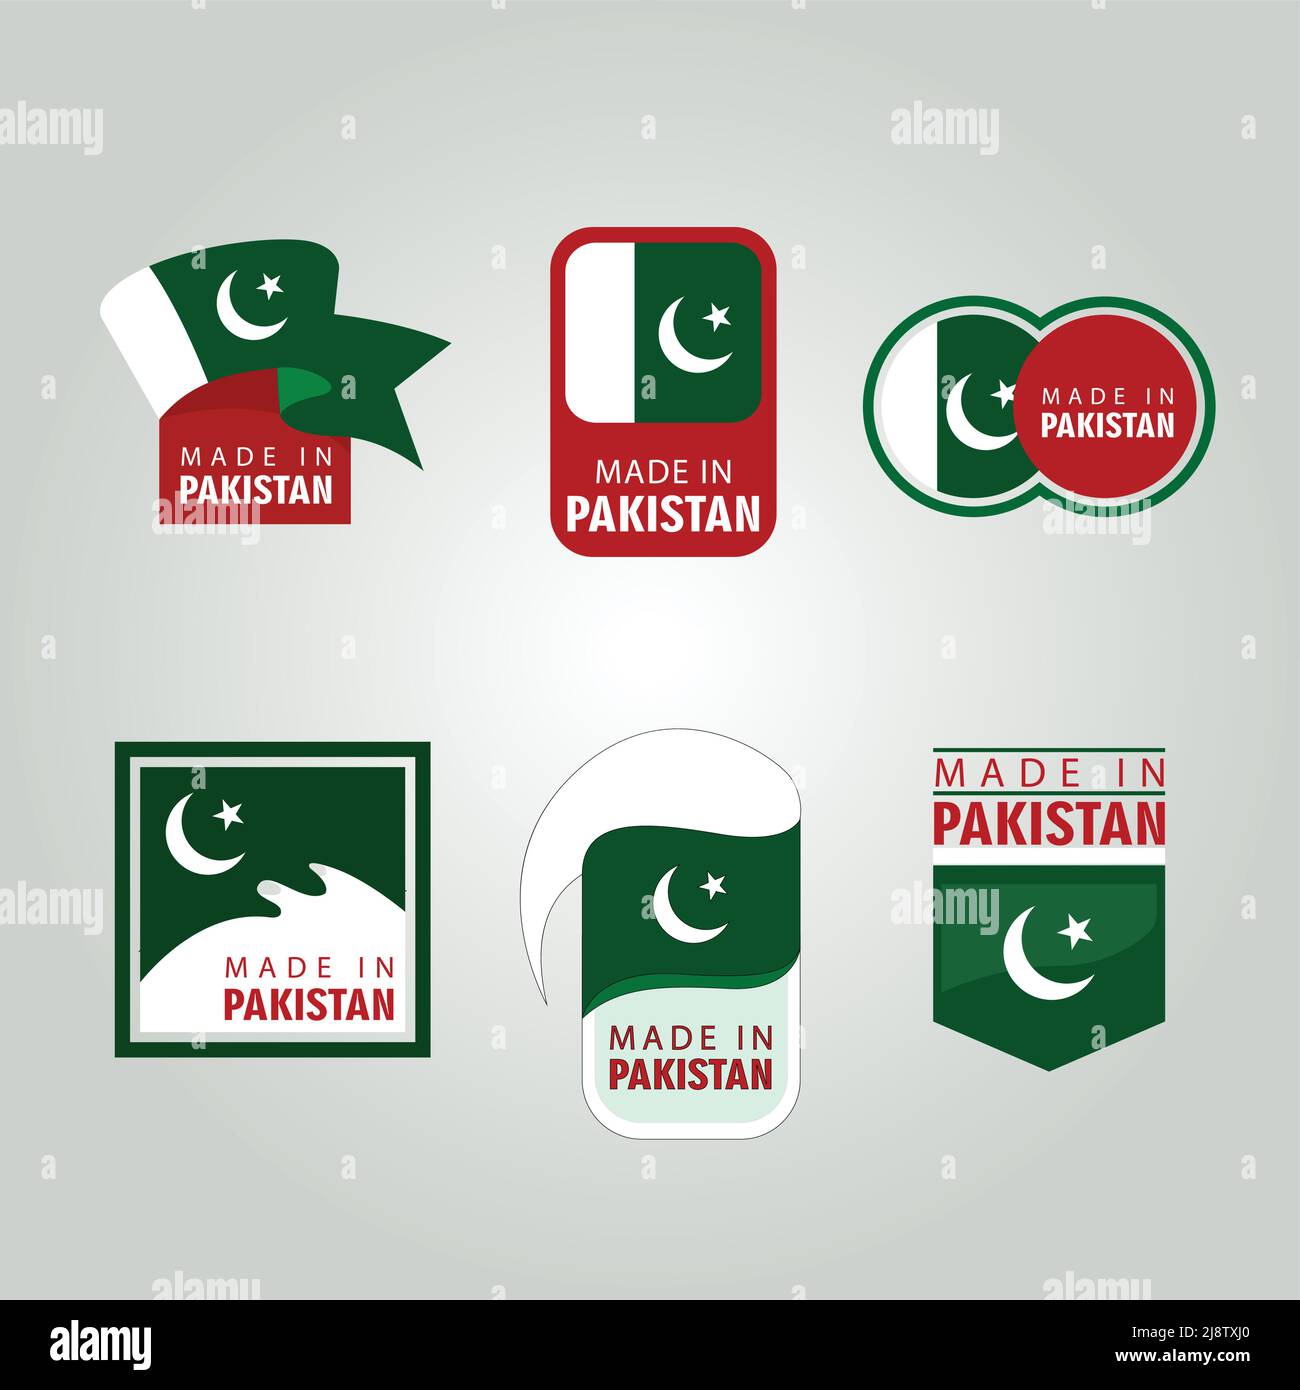 Made in Pakistan Label, Stamp, Badge, or Logo. With The National Flag of Pakistan. Stock Vector